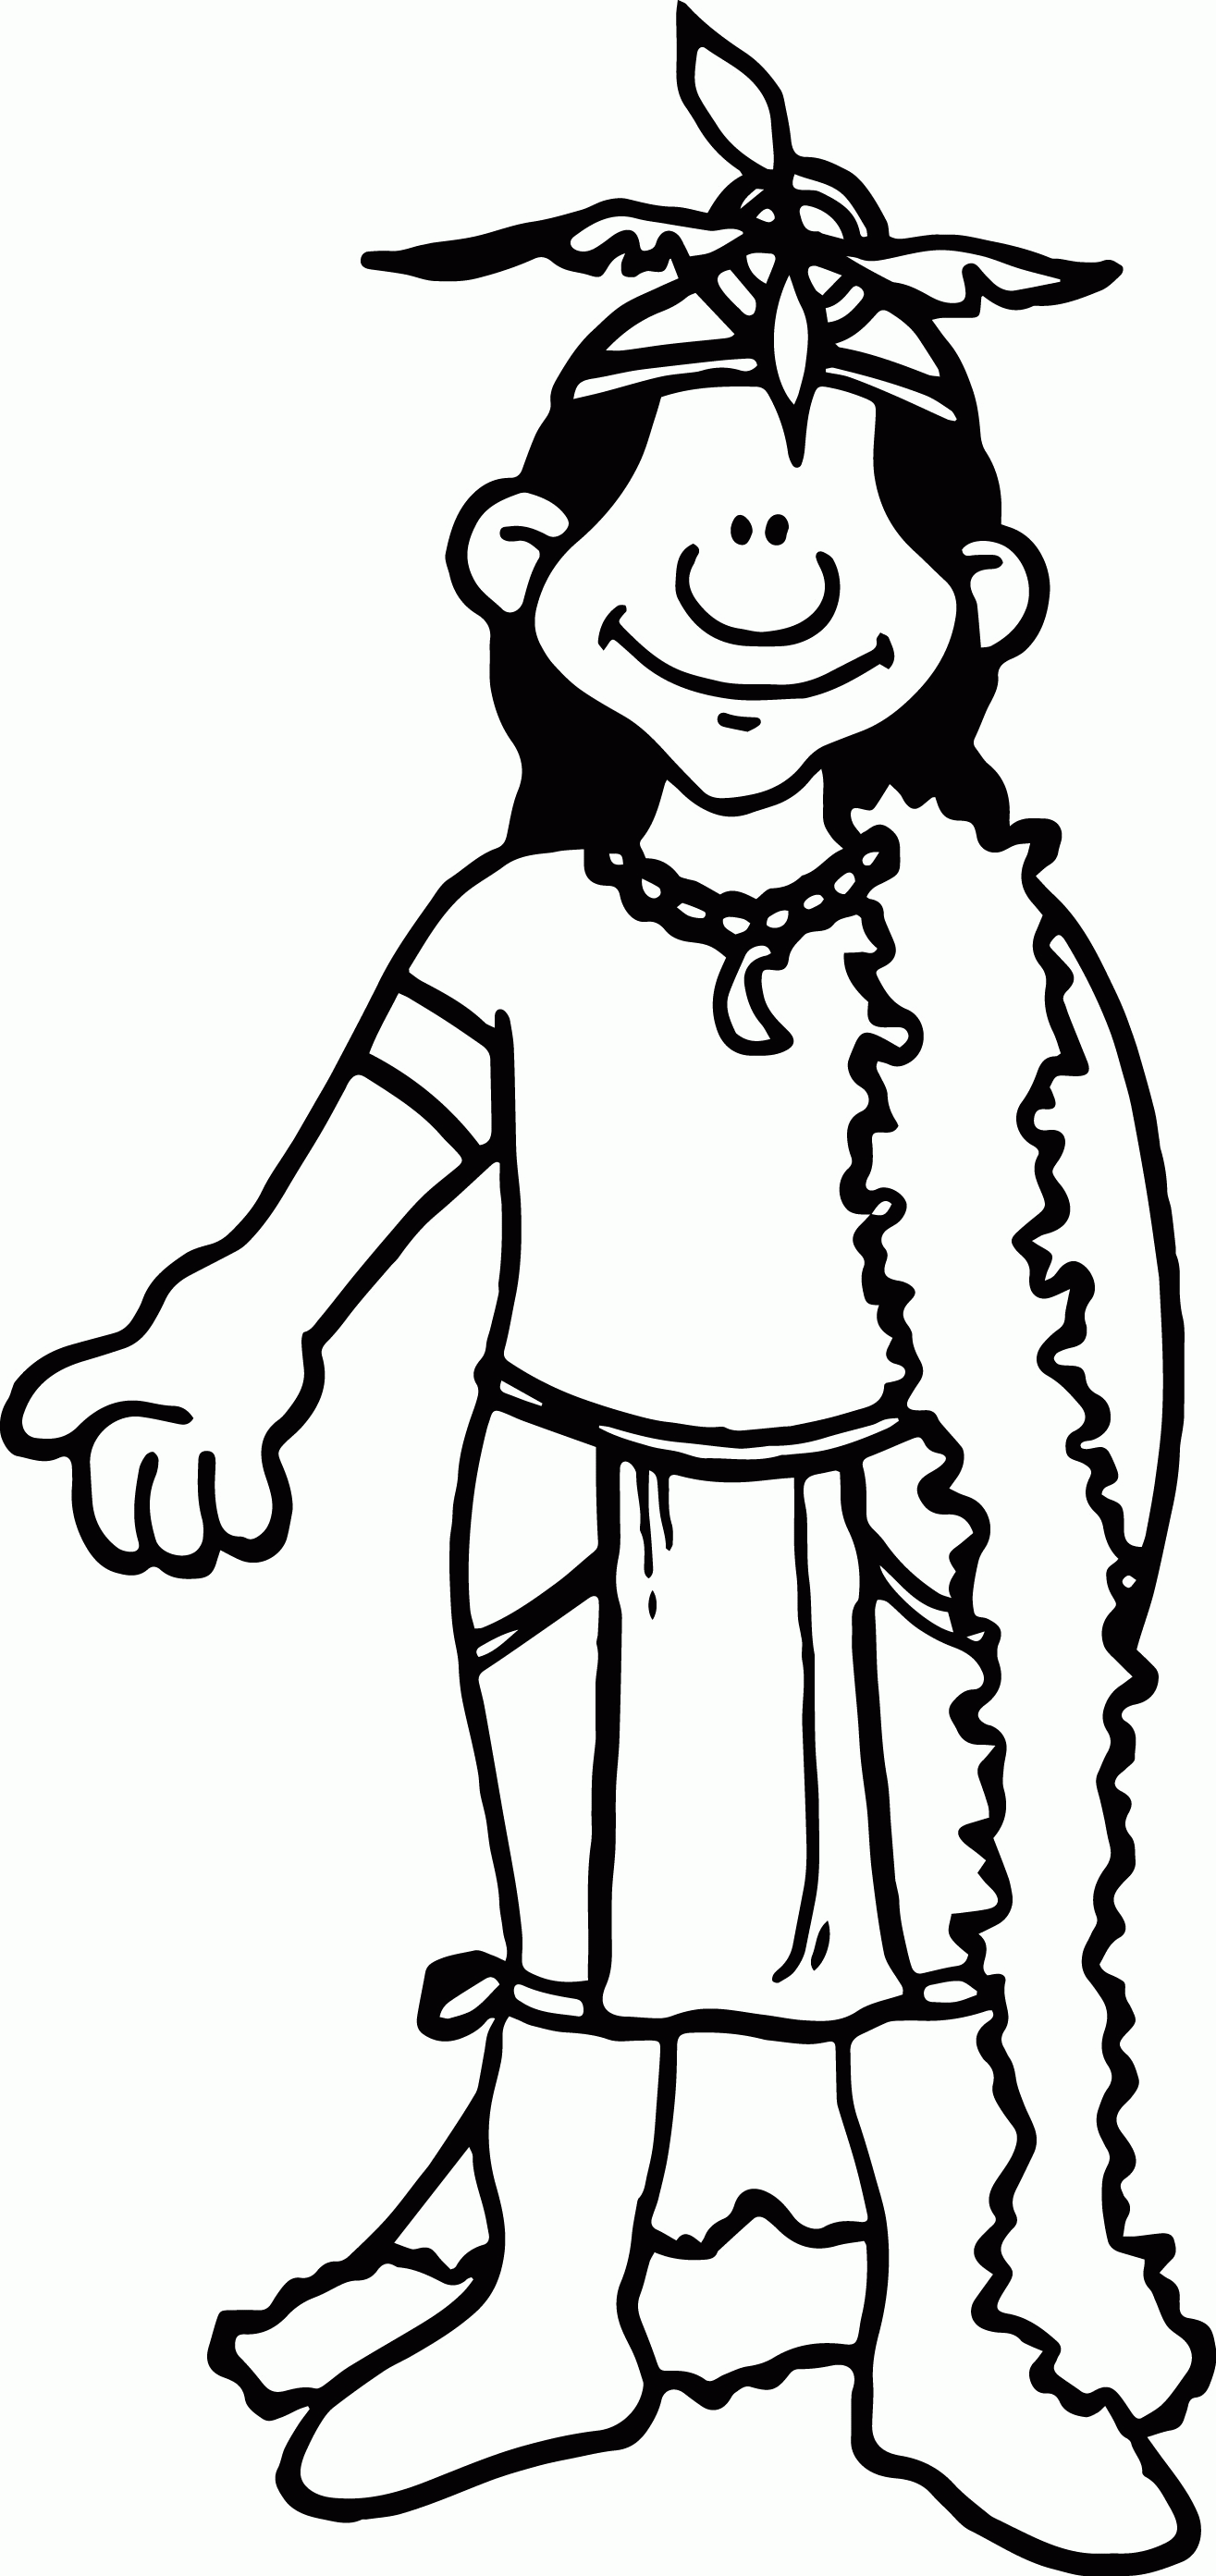 Native American Indian Man Coloring Page | Wecoloringpage